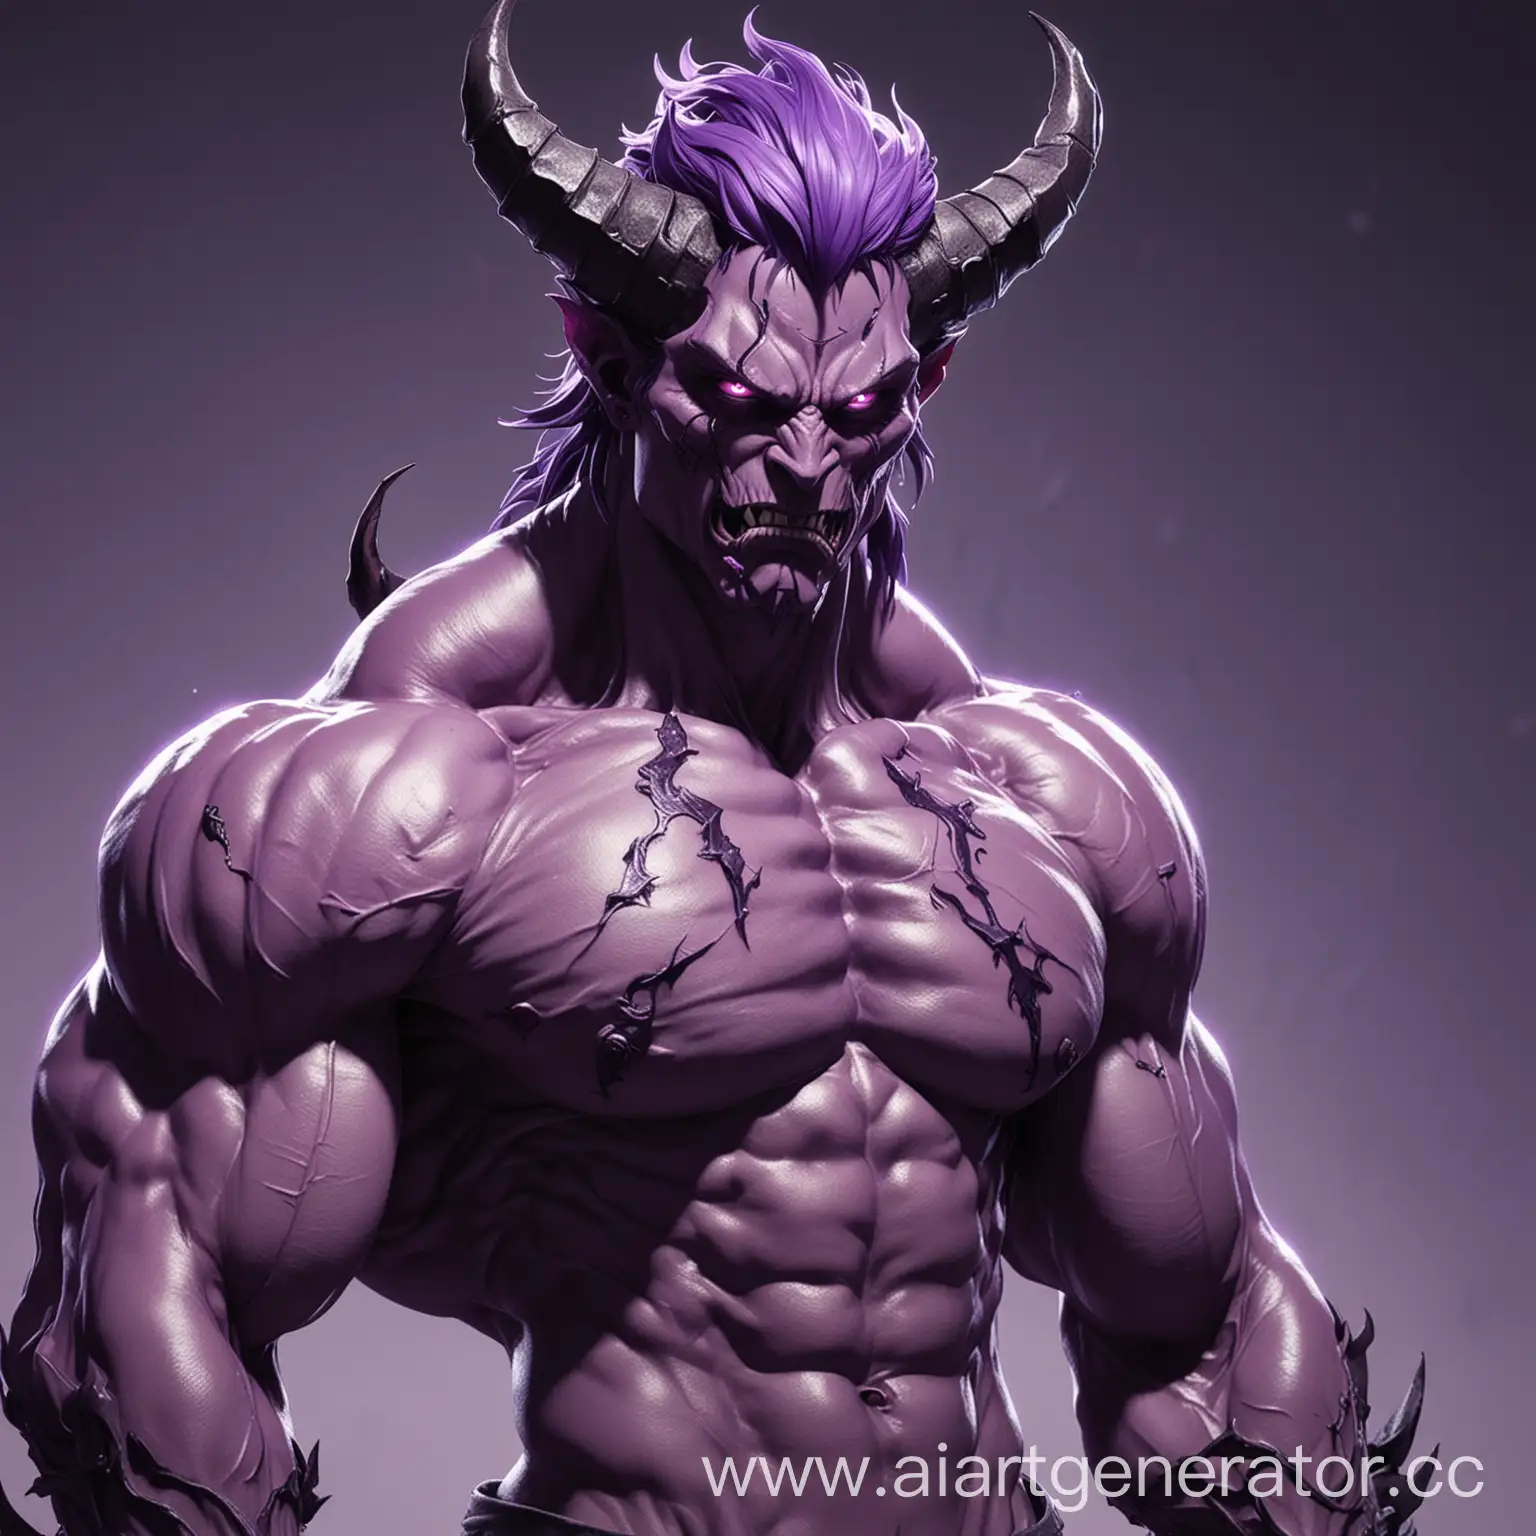 Powerful-Anime-Demon-Character-in-Dynamic-Pose-with-Purple-Aesthetics